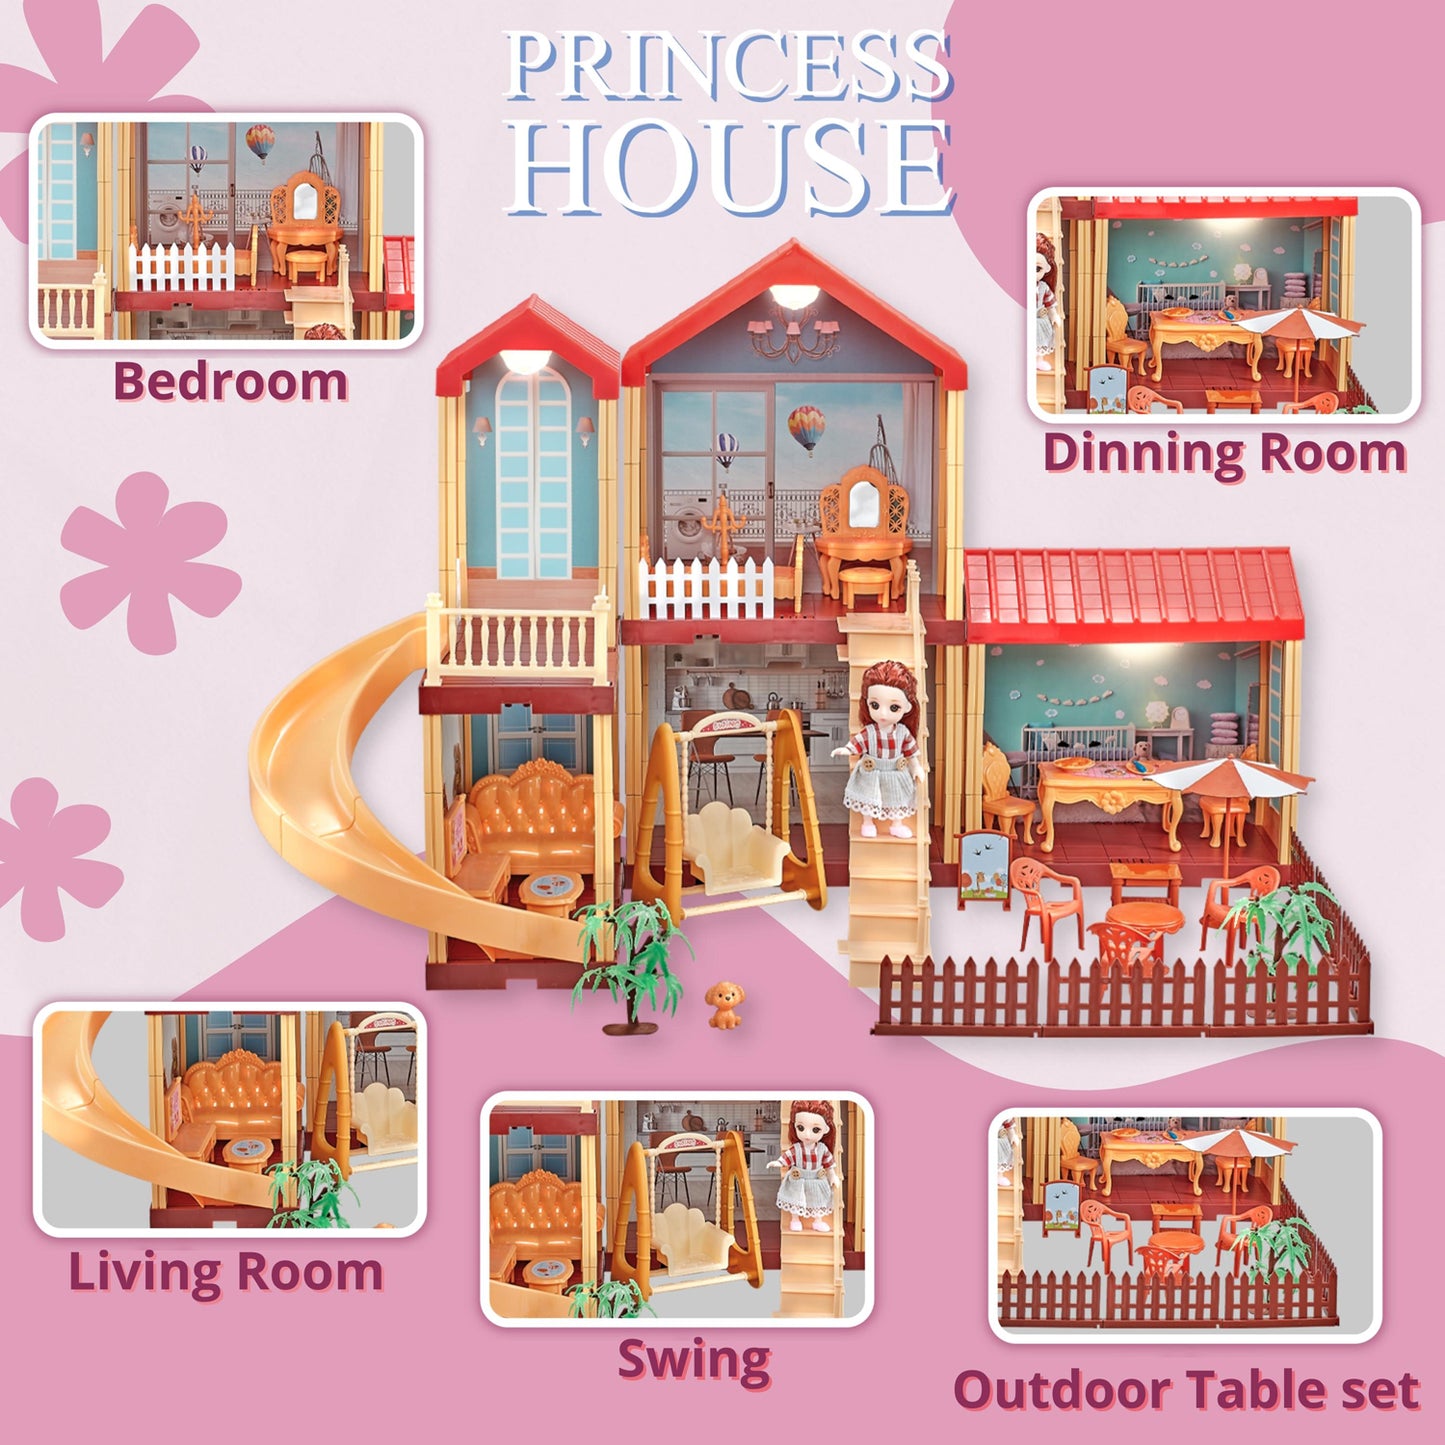 FITTO 2 Rooms huge 2 story dollhouse